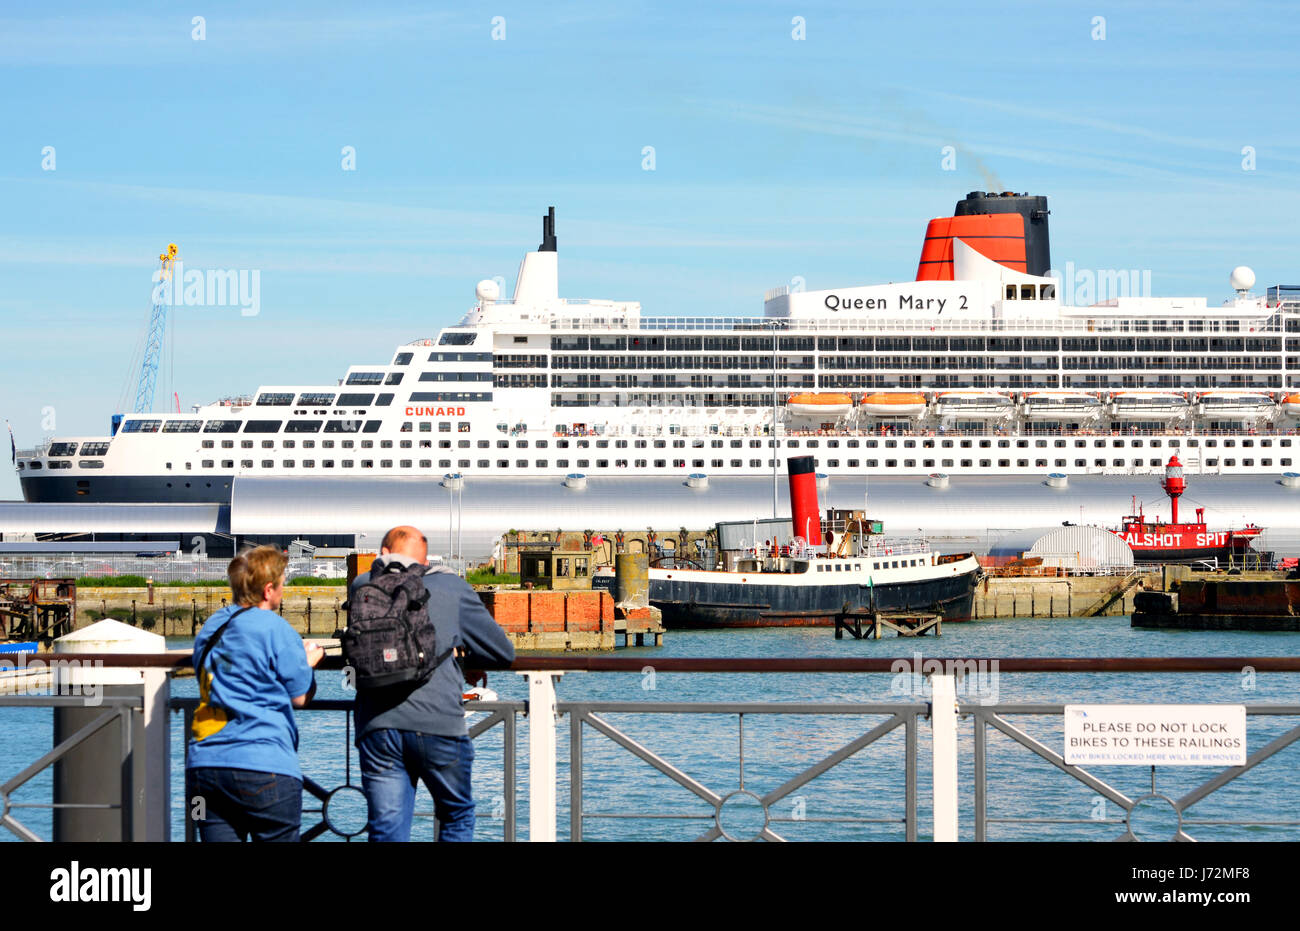 Queen Mary 2 cruise ship at Ocean Cruise Terminal (Berth 46) seen from Town Quay in Southampton in 2017, UK Stock Photo